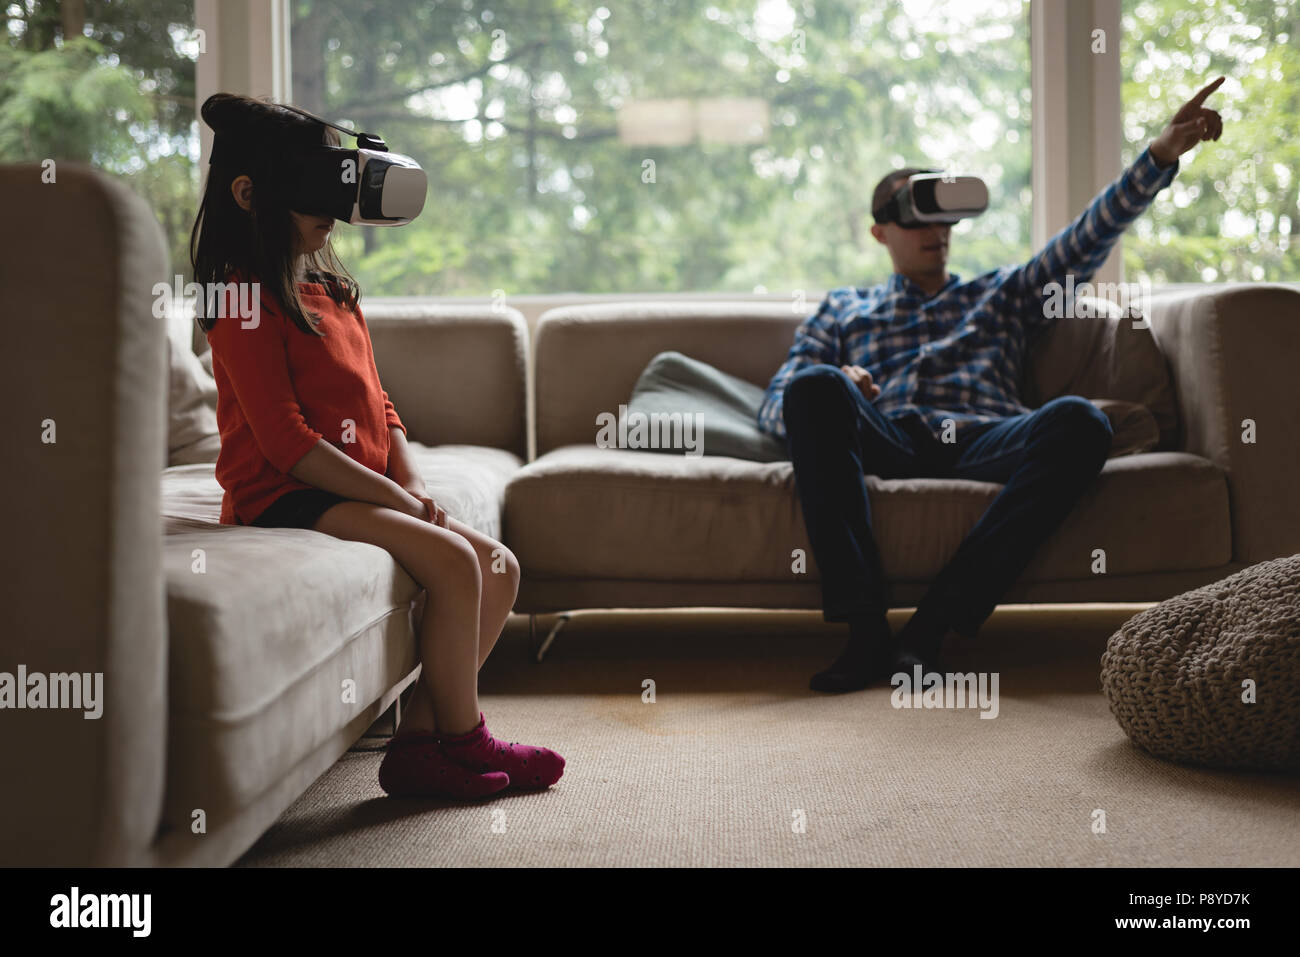 Father and daughter using virtual reality headset in living room Stock Photo